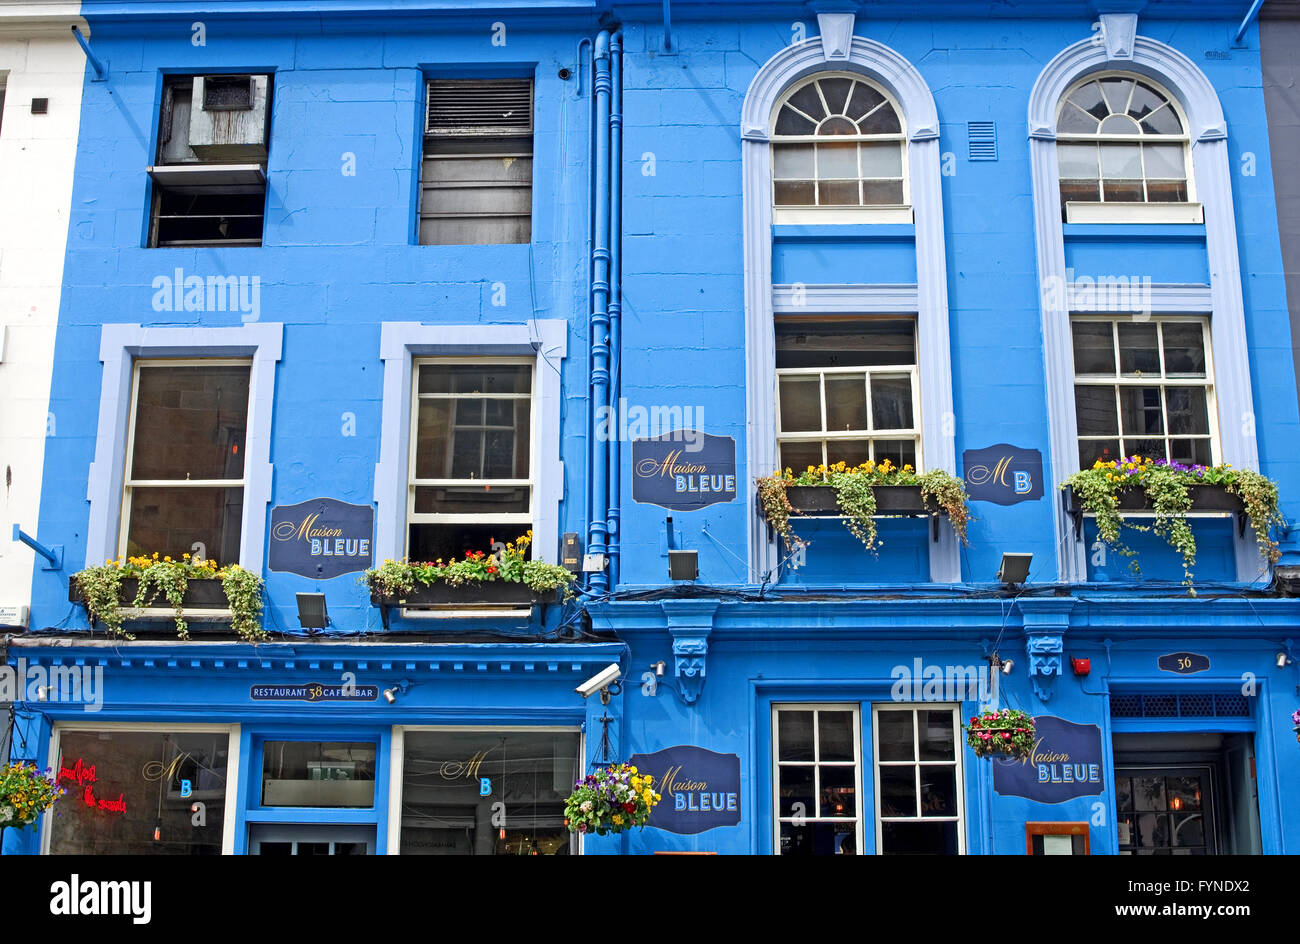 Close-up of the frontage of the 'Maison Bleue' restaurant and cafe bar on Victoria Street, Edinburgh Old Town, Scotland UK Stock Photo